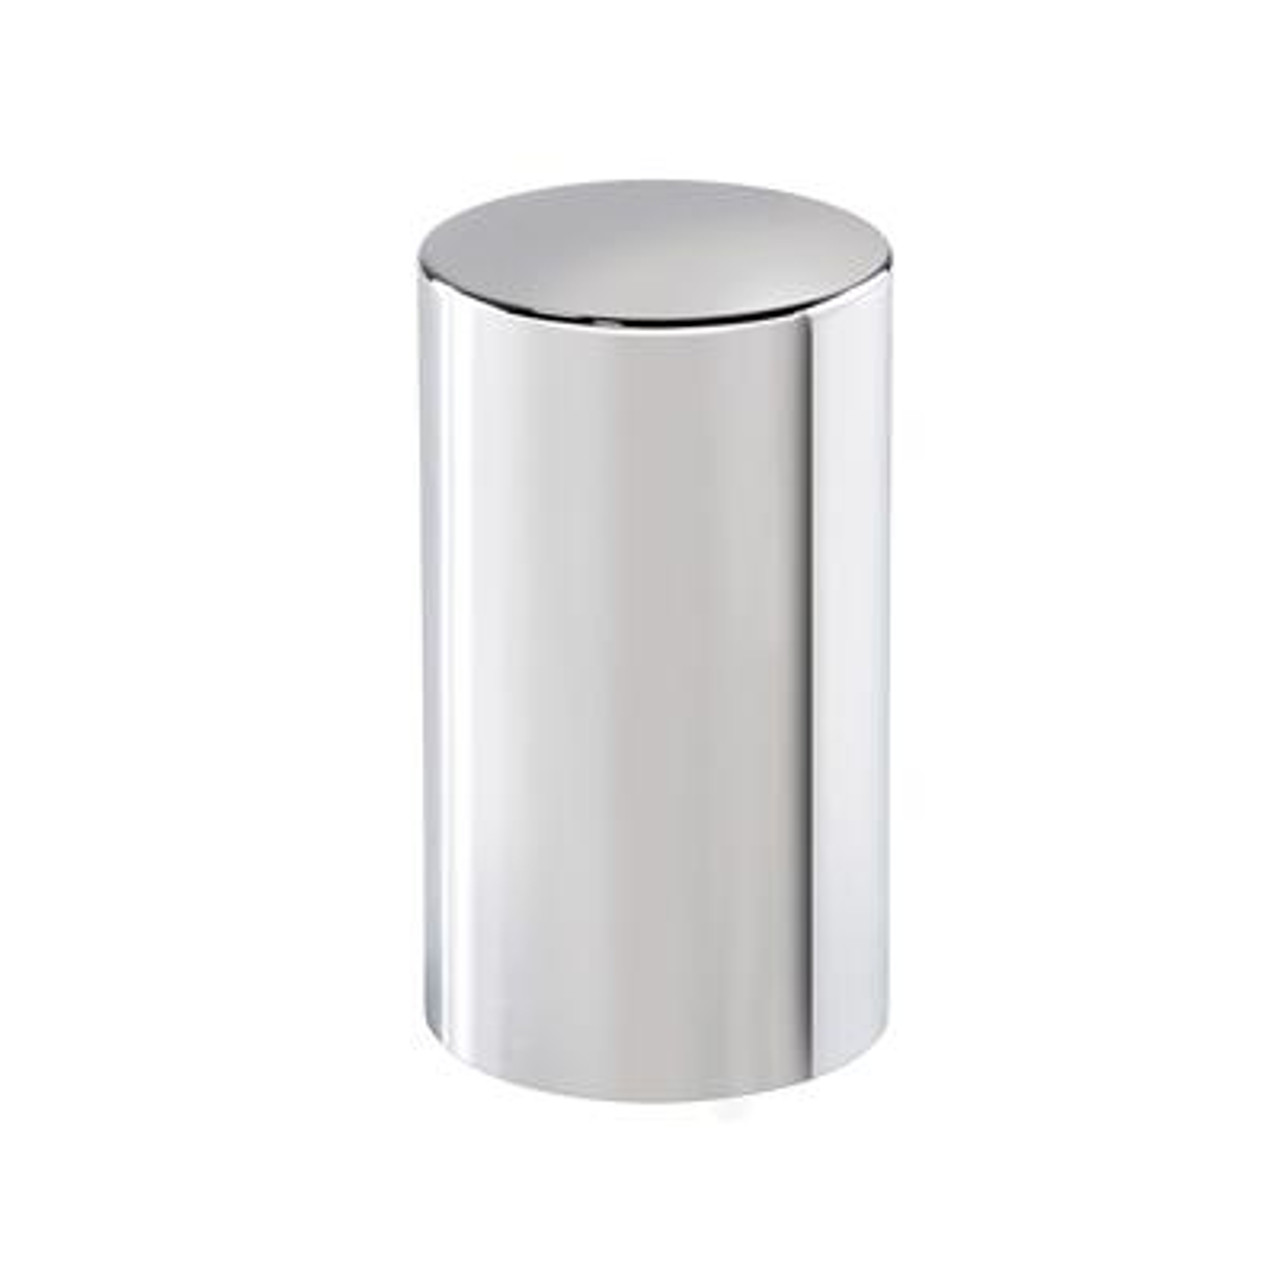 33mm X 3-1/2" Chrome Plastic Cylinder Nut Covers - Push-On (60-Pack)